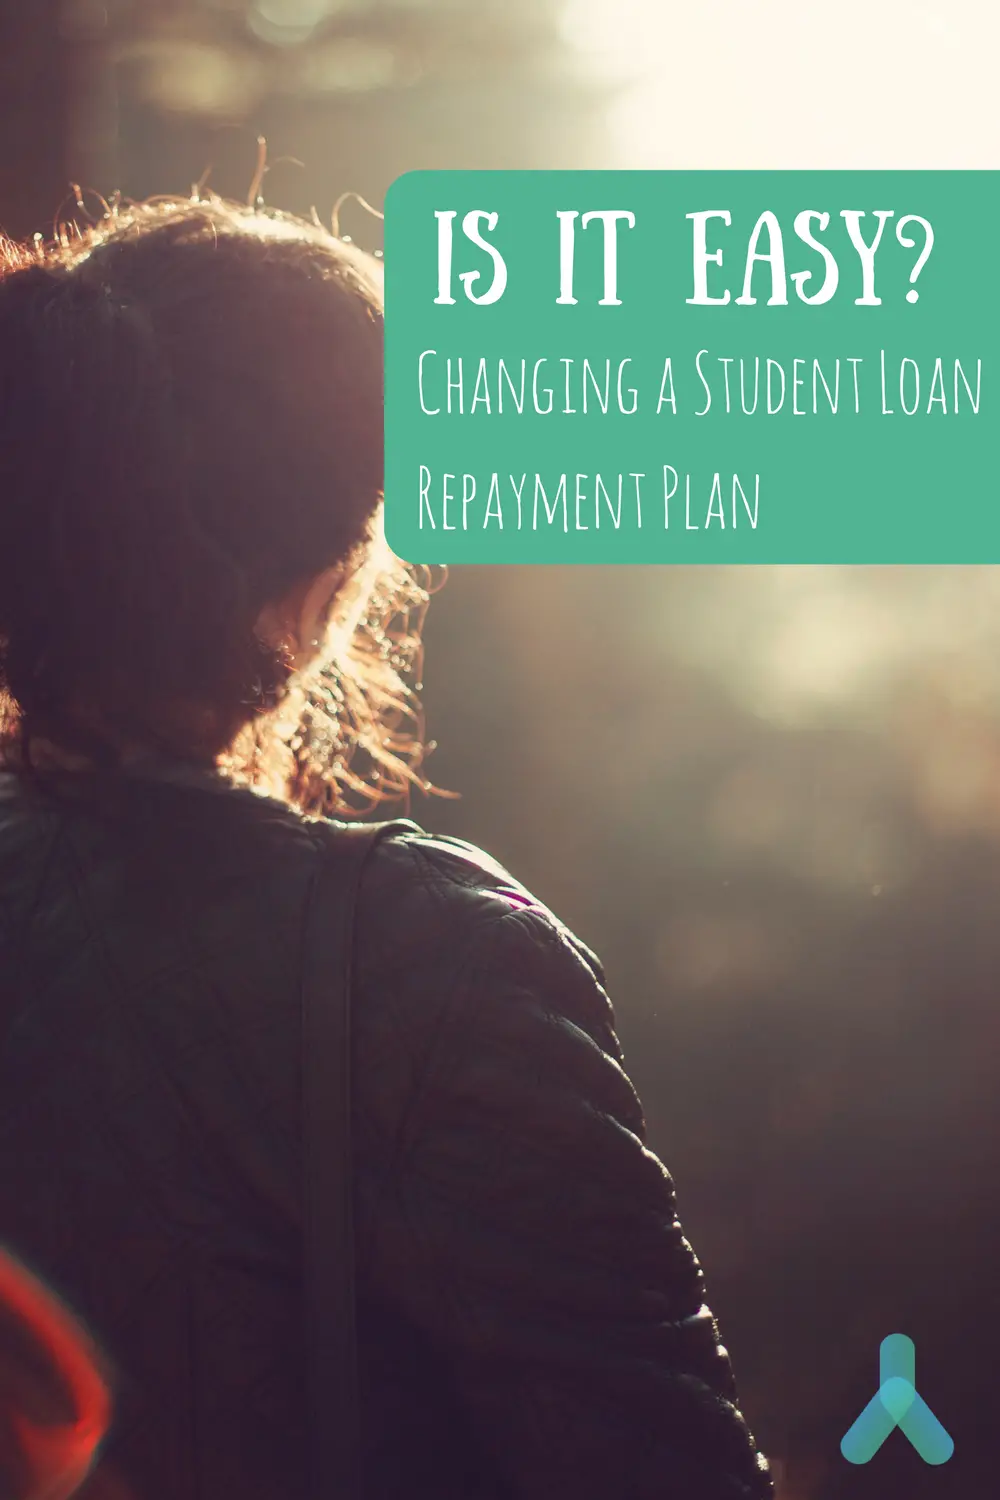 Can You Change Student Loan Repayment Plans